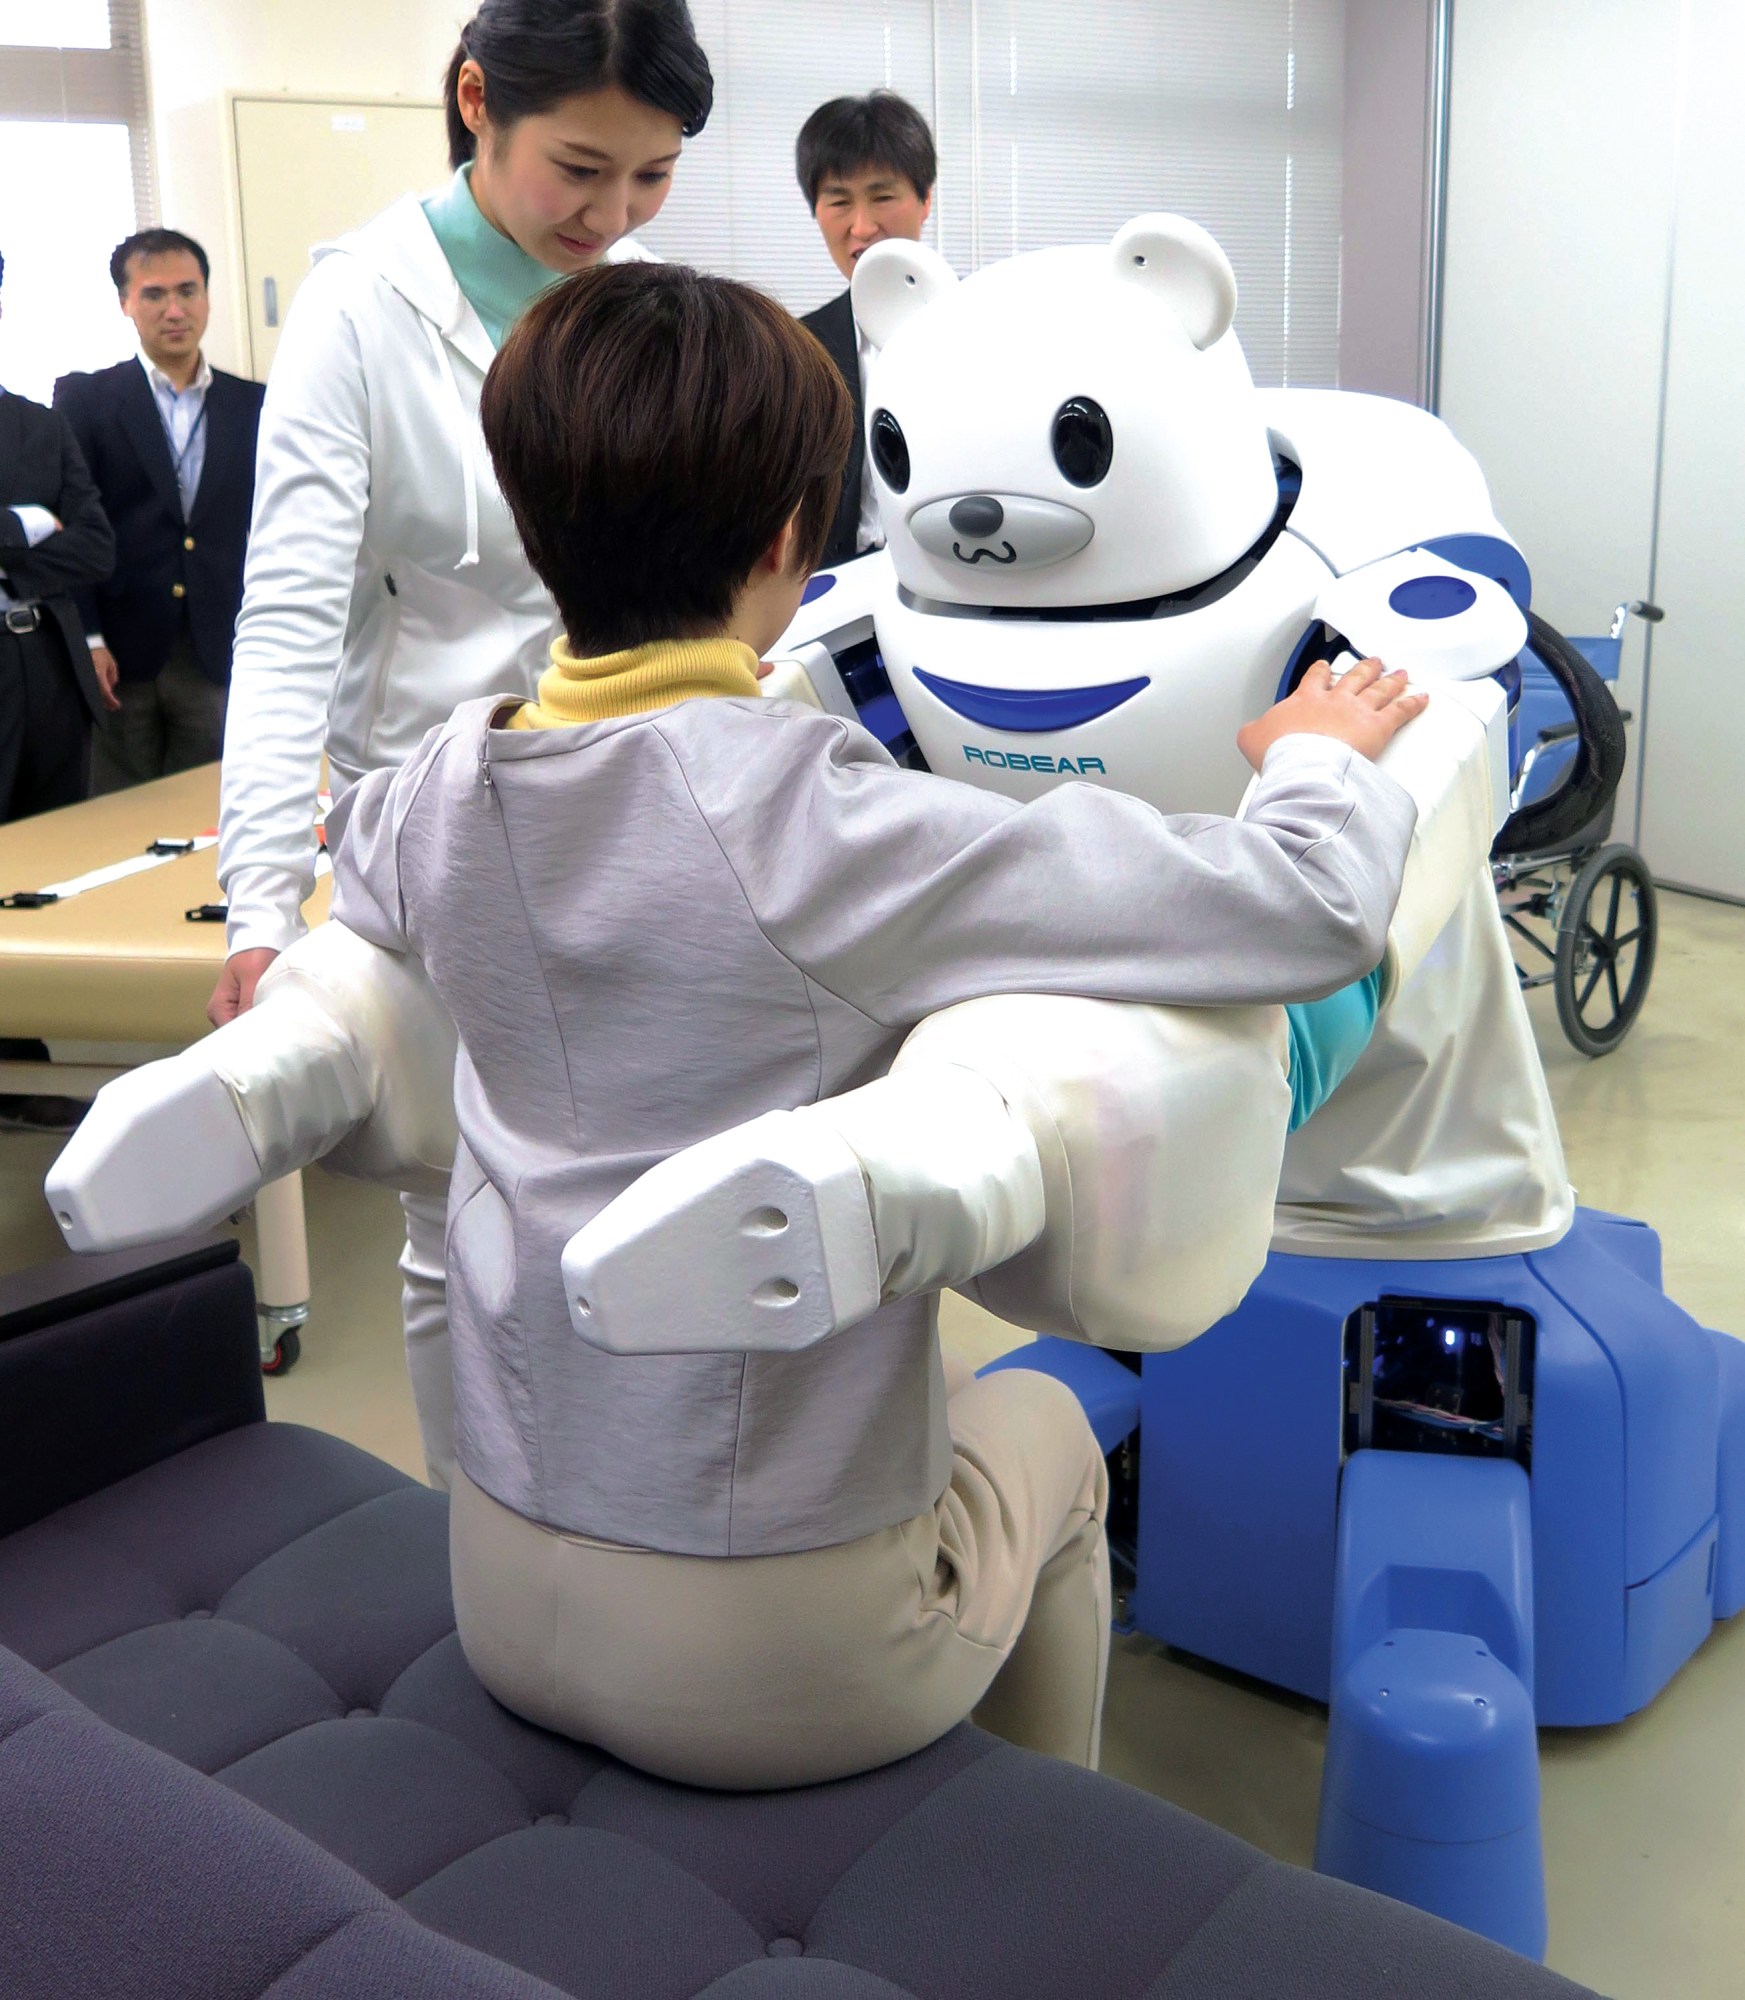 Robear is ready to lift a person during a press demonstration.